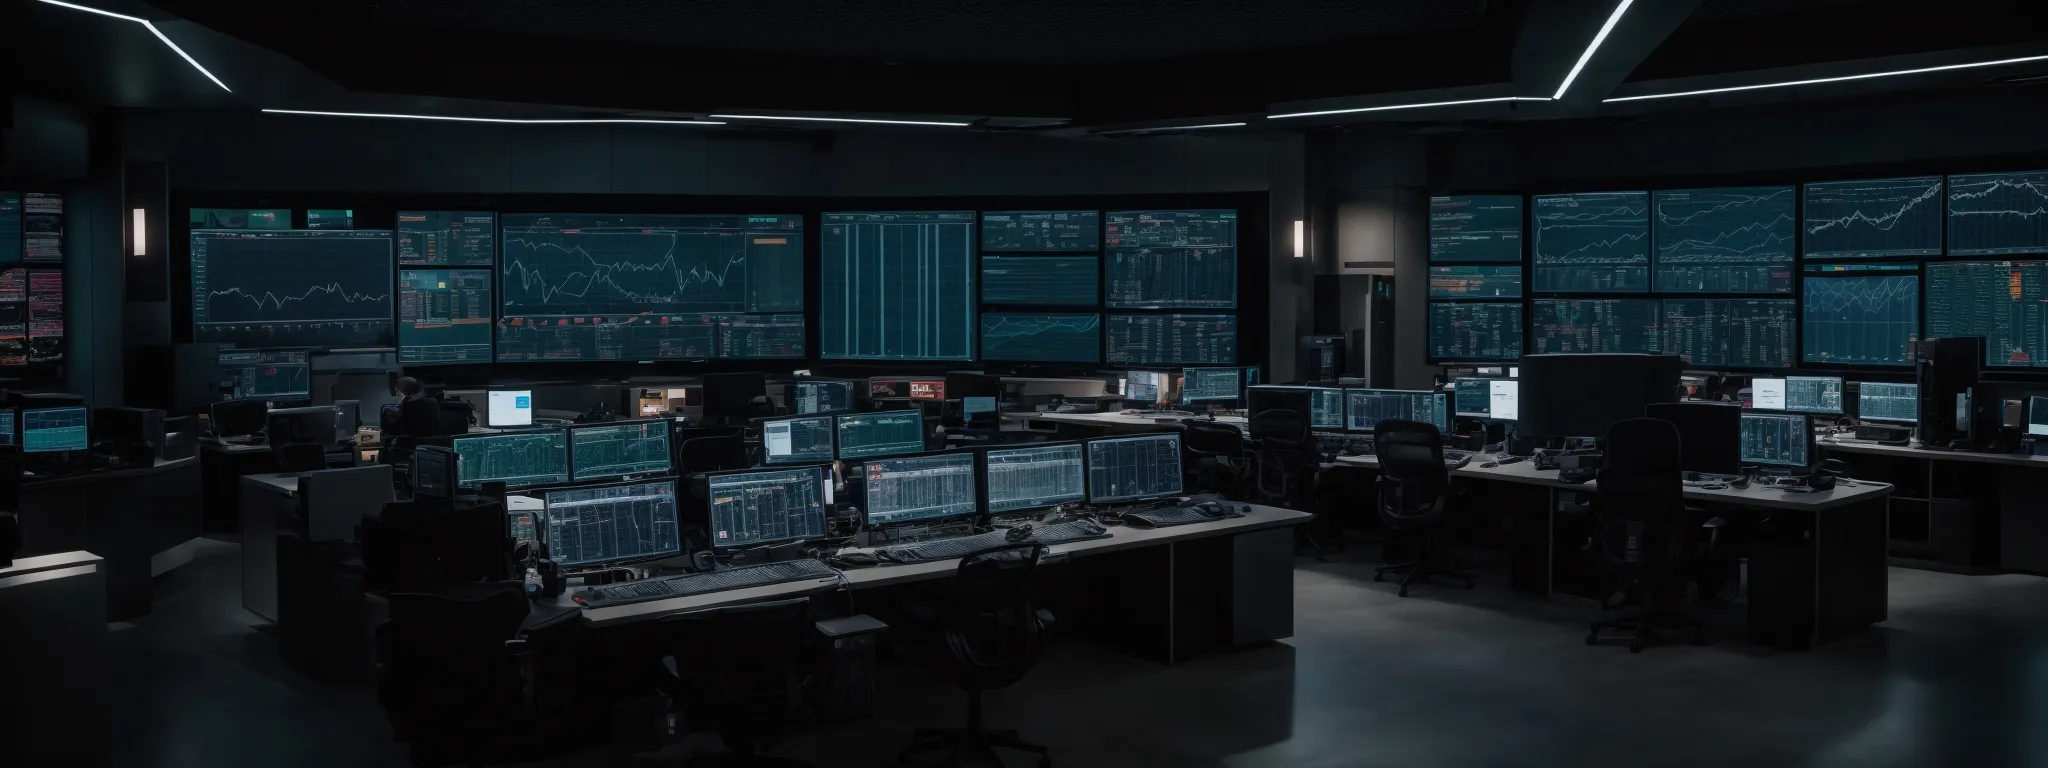 an expansive control room filled with large screens displaying dynamic data visualizations and graphs.